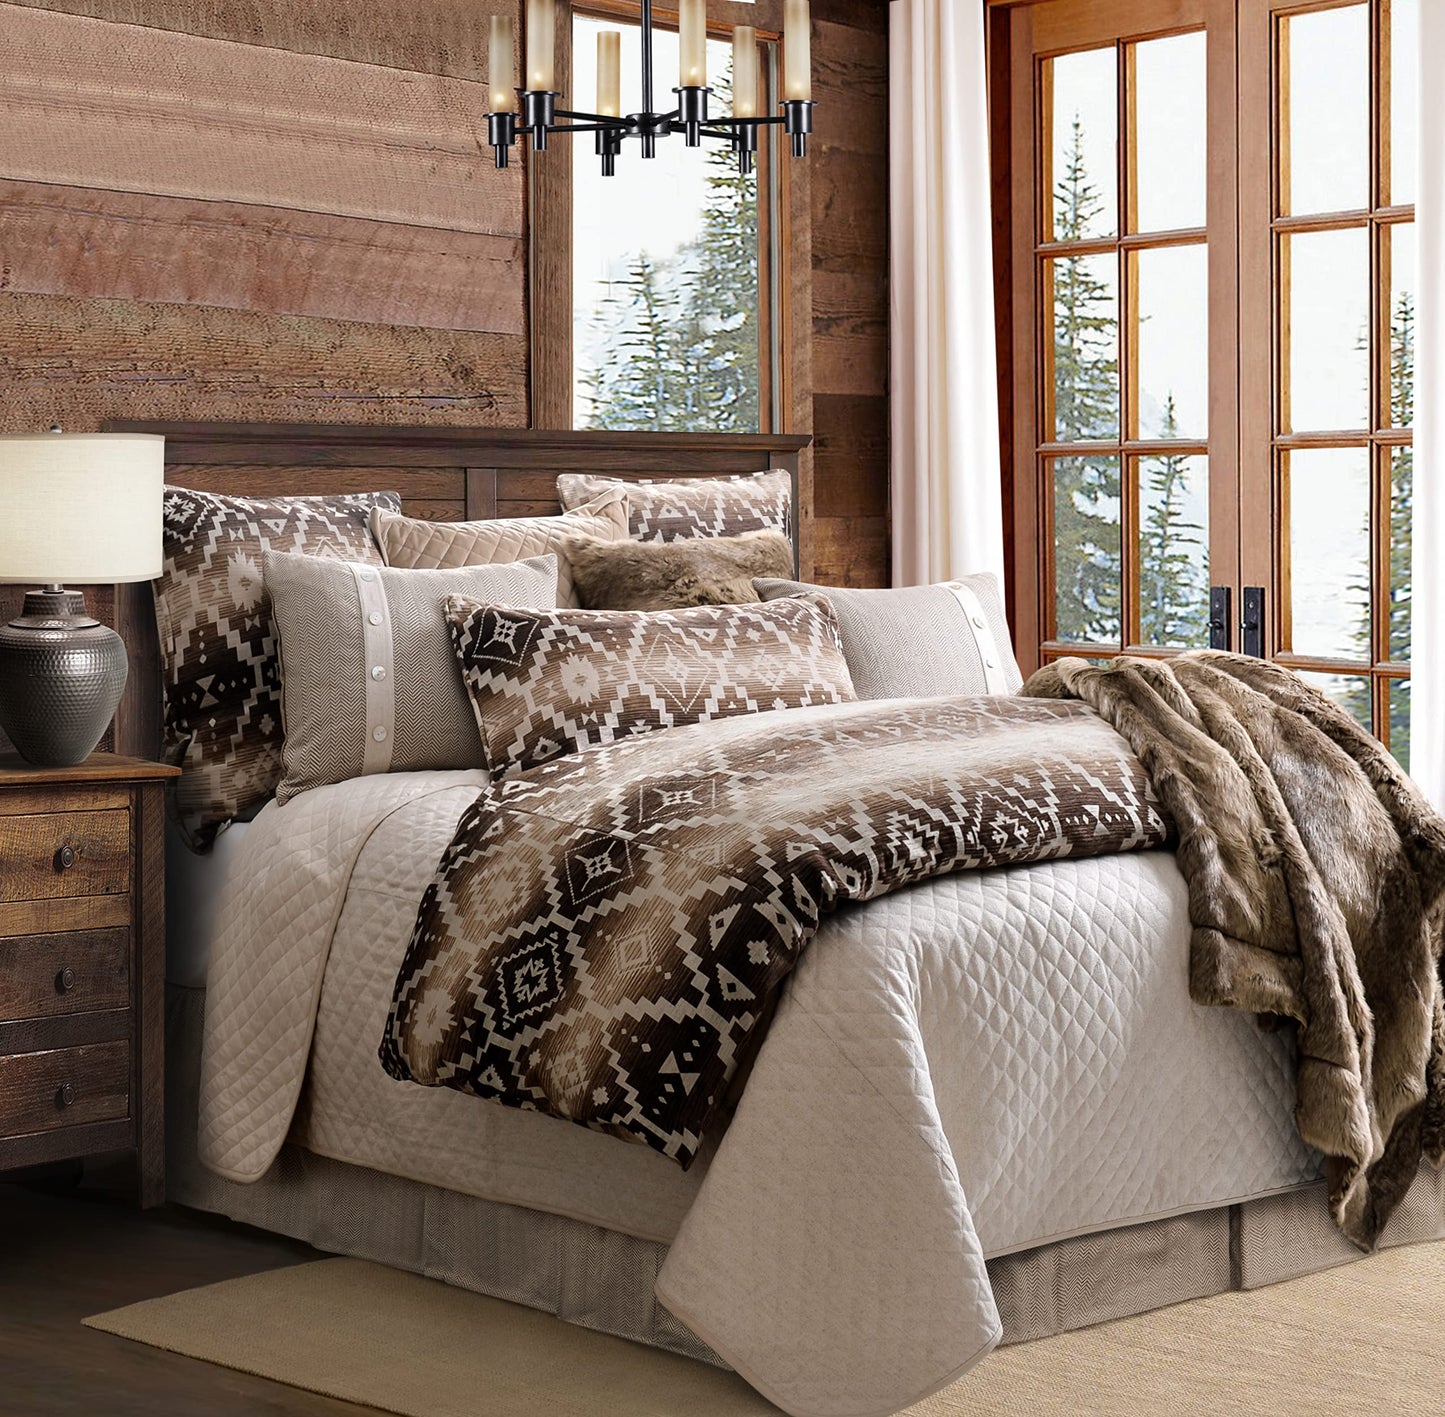 Paseo Road by HiEnd Accents Chalet Aztec 3 Piece Comforter Set with Pillow Shams, Super Queen Size, Modern Southwestern Rustic Style Luxury Bedding Set, 1 Comforter and 2 Pillowcases